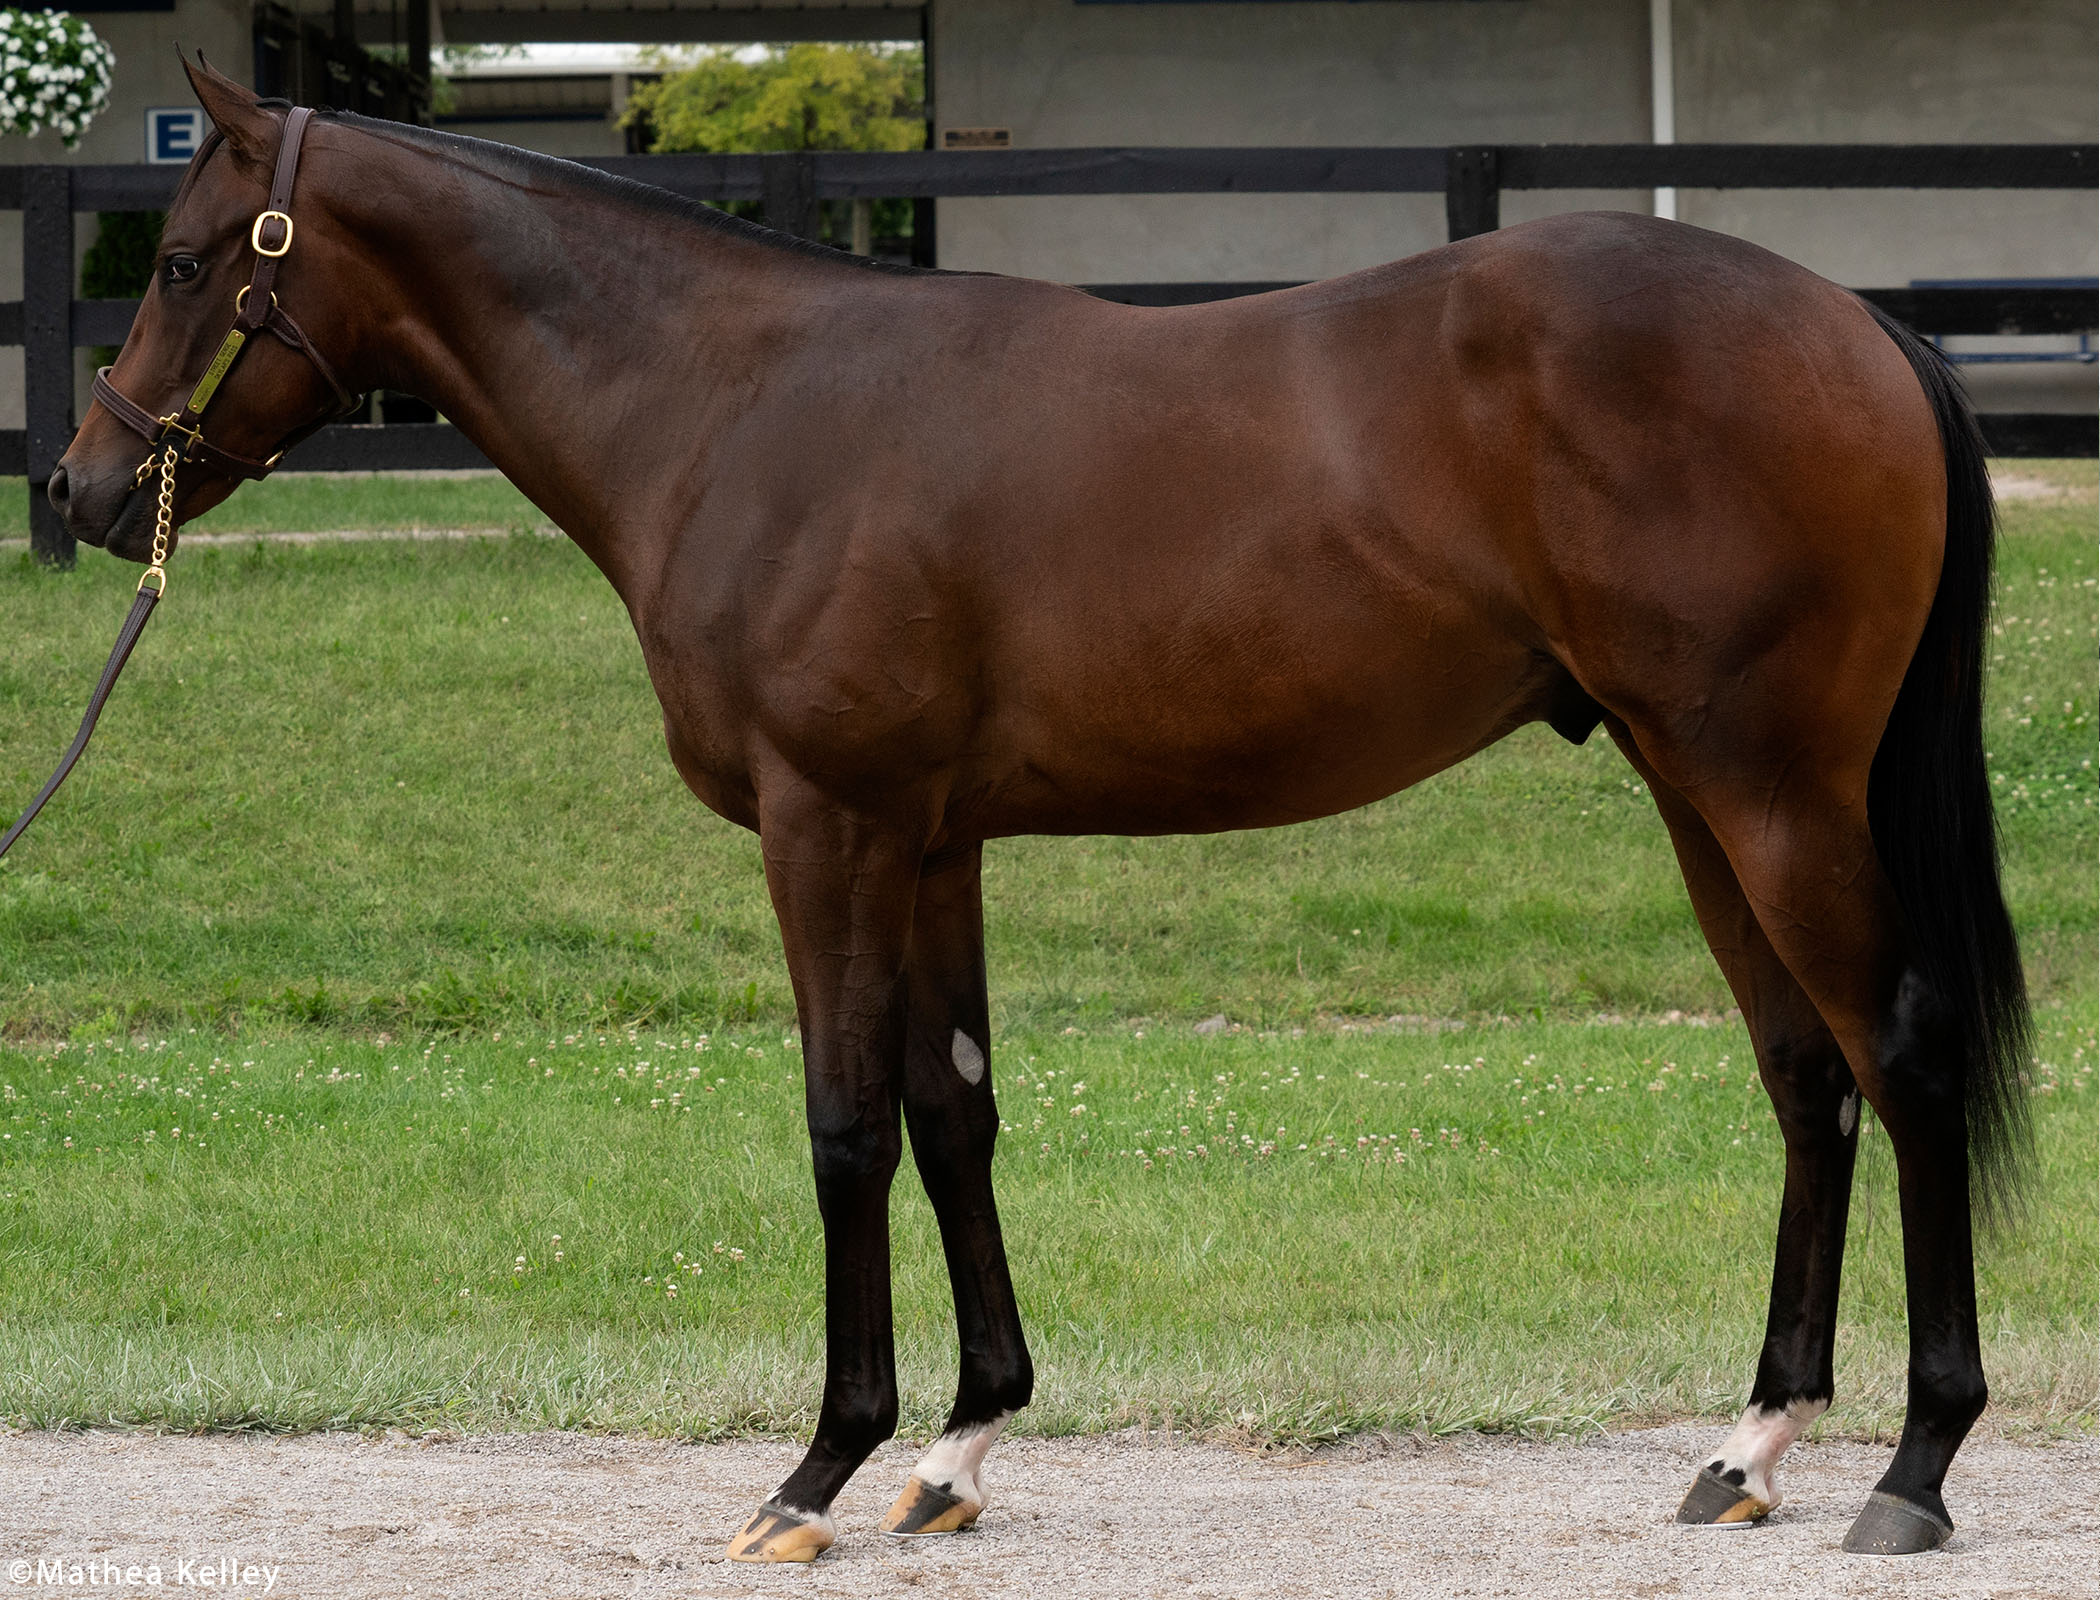 Street Sense colt out of the The Factor mare Skylar's Pass, purchased at Fasig-Tipton's Selected Yearling Showcase and available for a thoroughbred racing partnership.